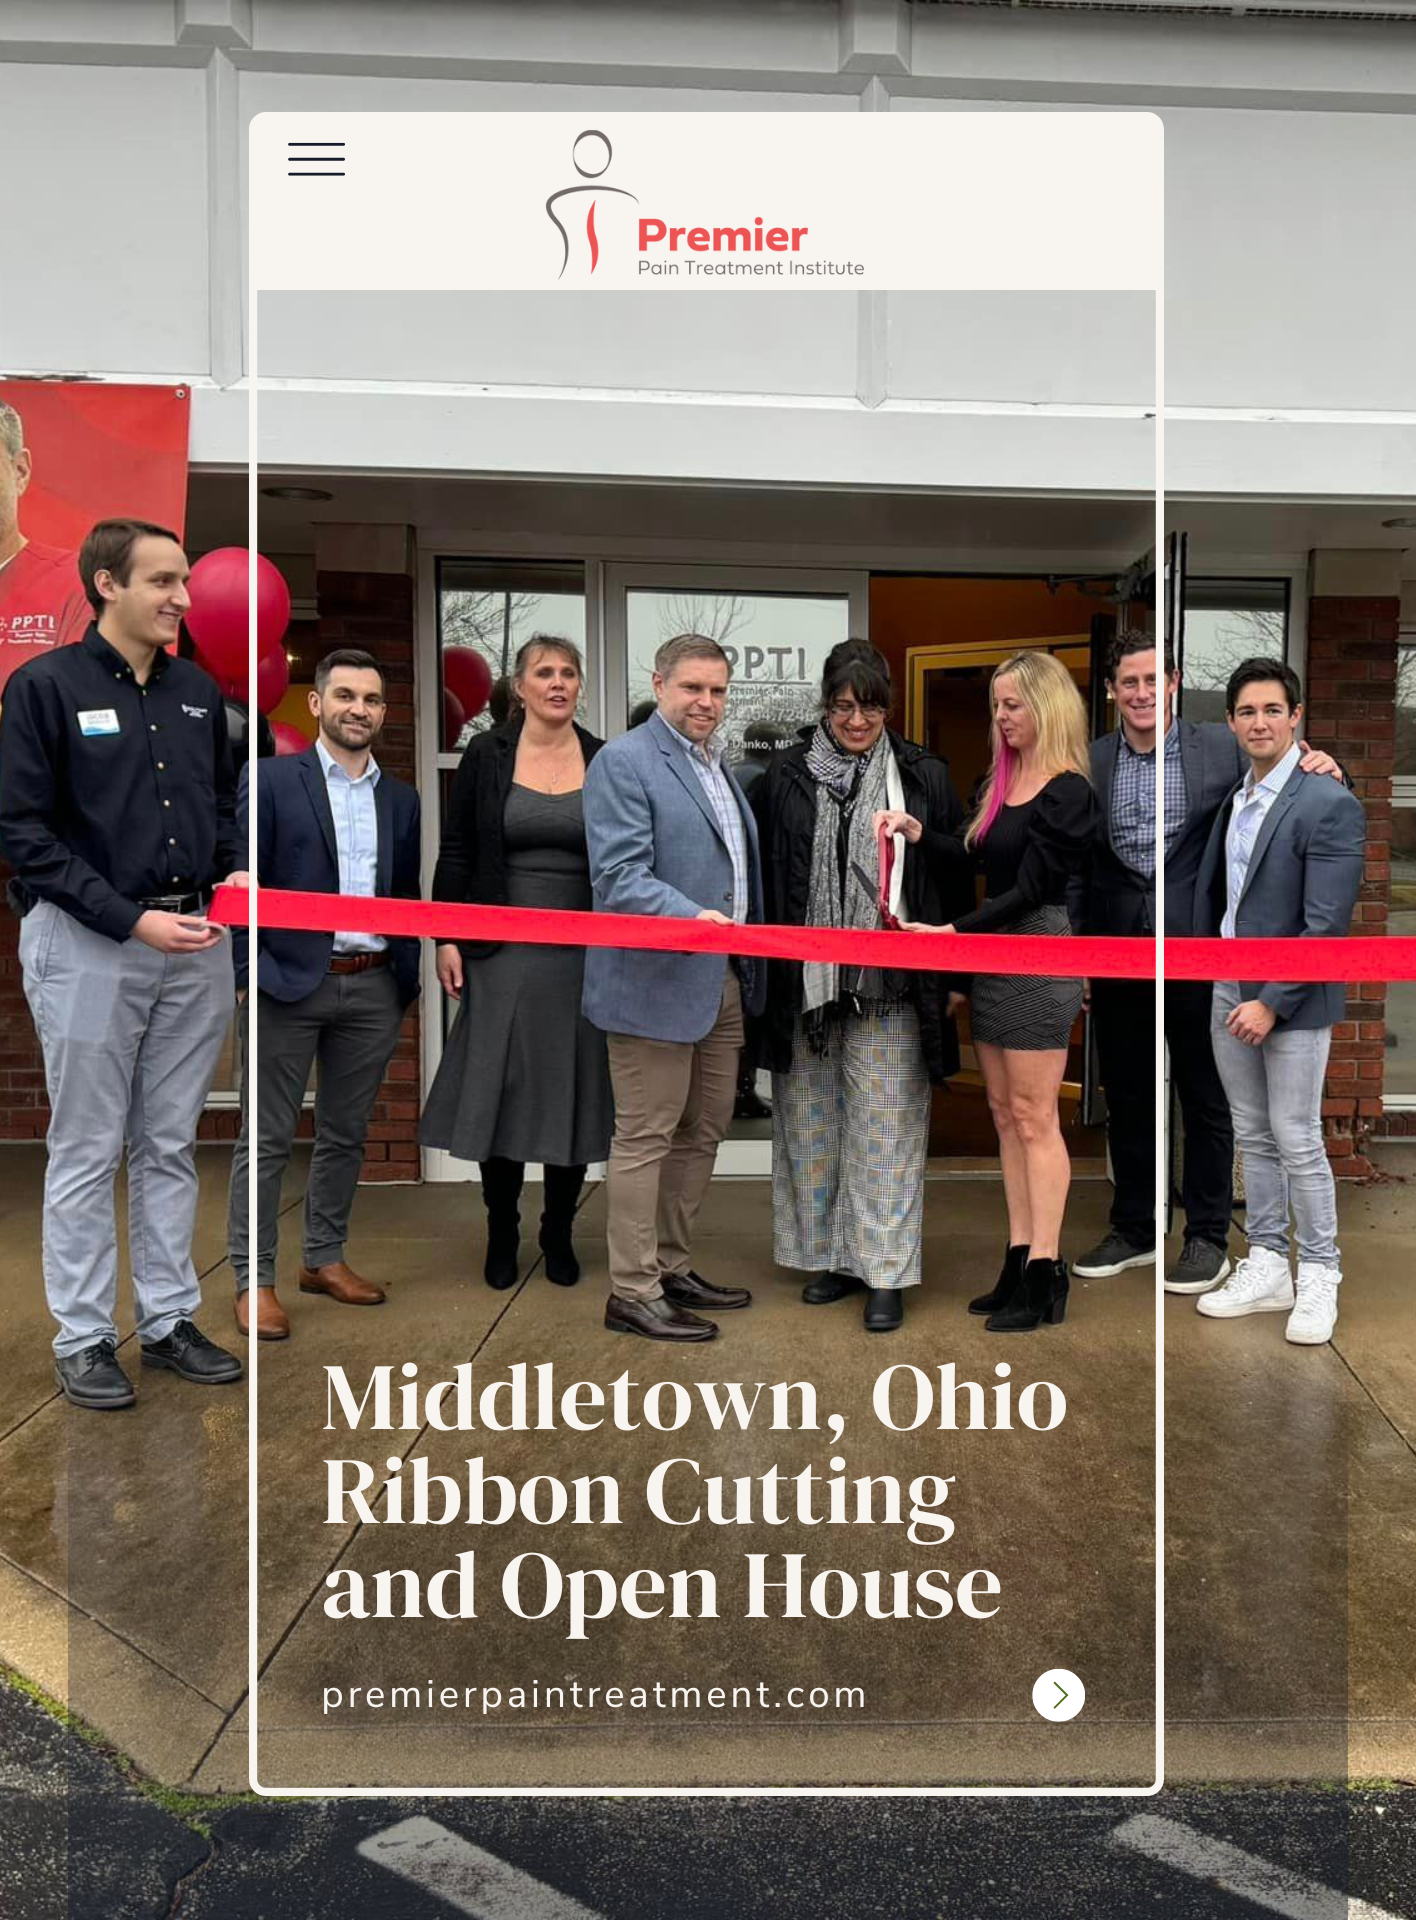 The team at Premier Pain Treatment Institute celebrate their Middletown, Ohio ribbon cutting with members of the City of Middletown